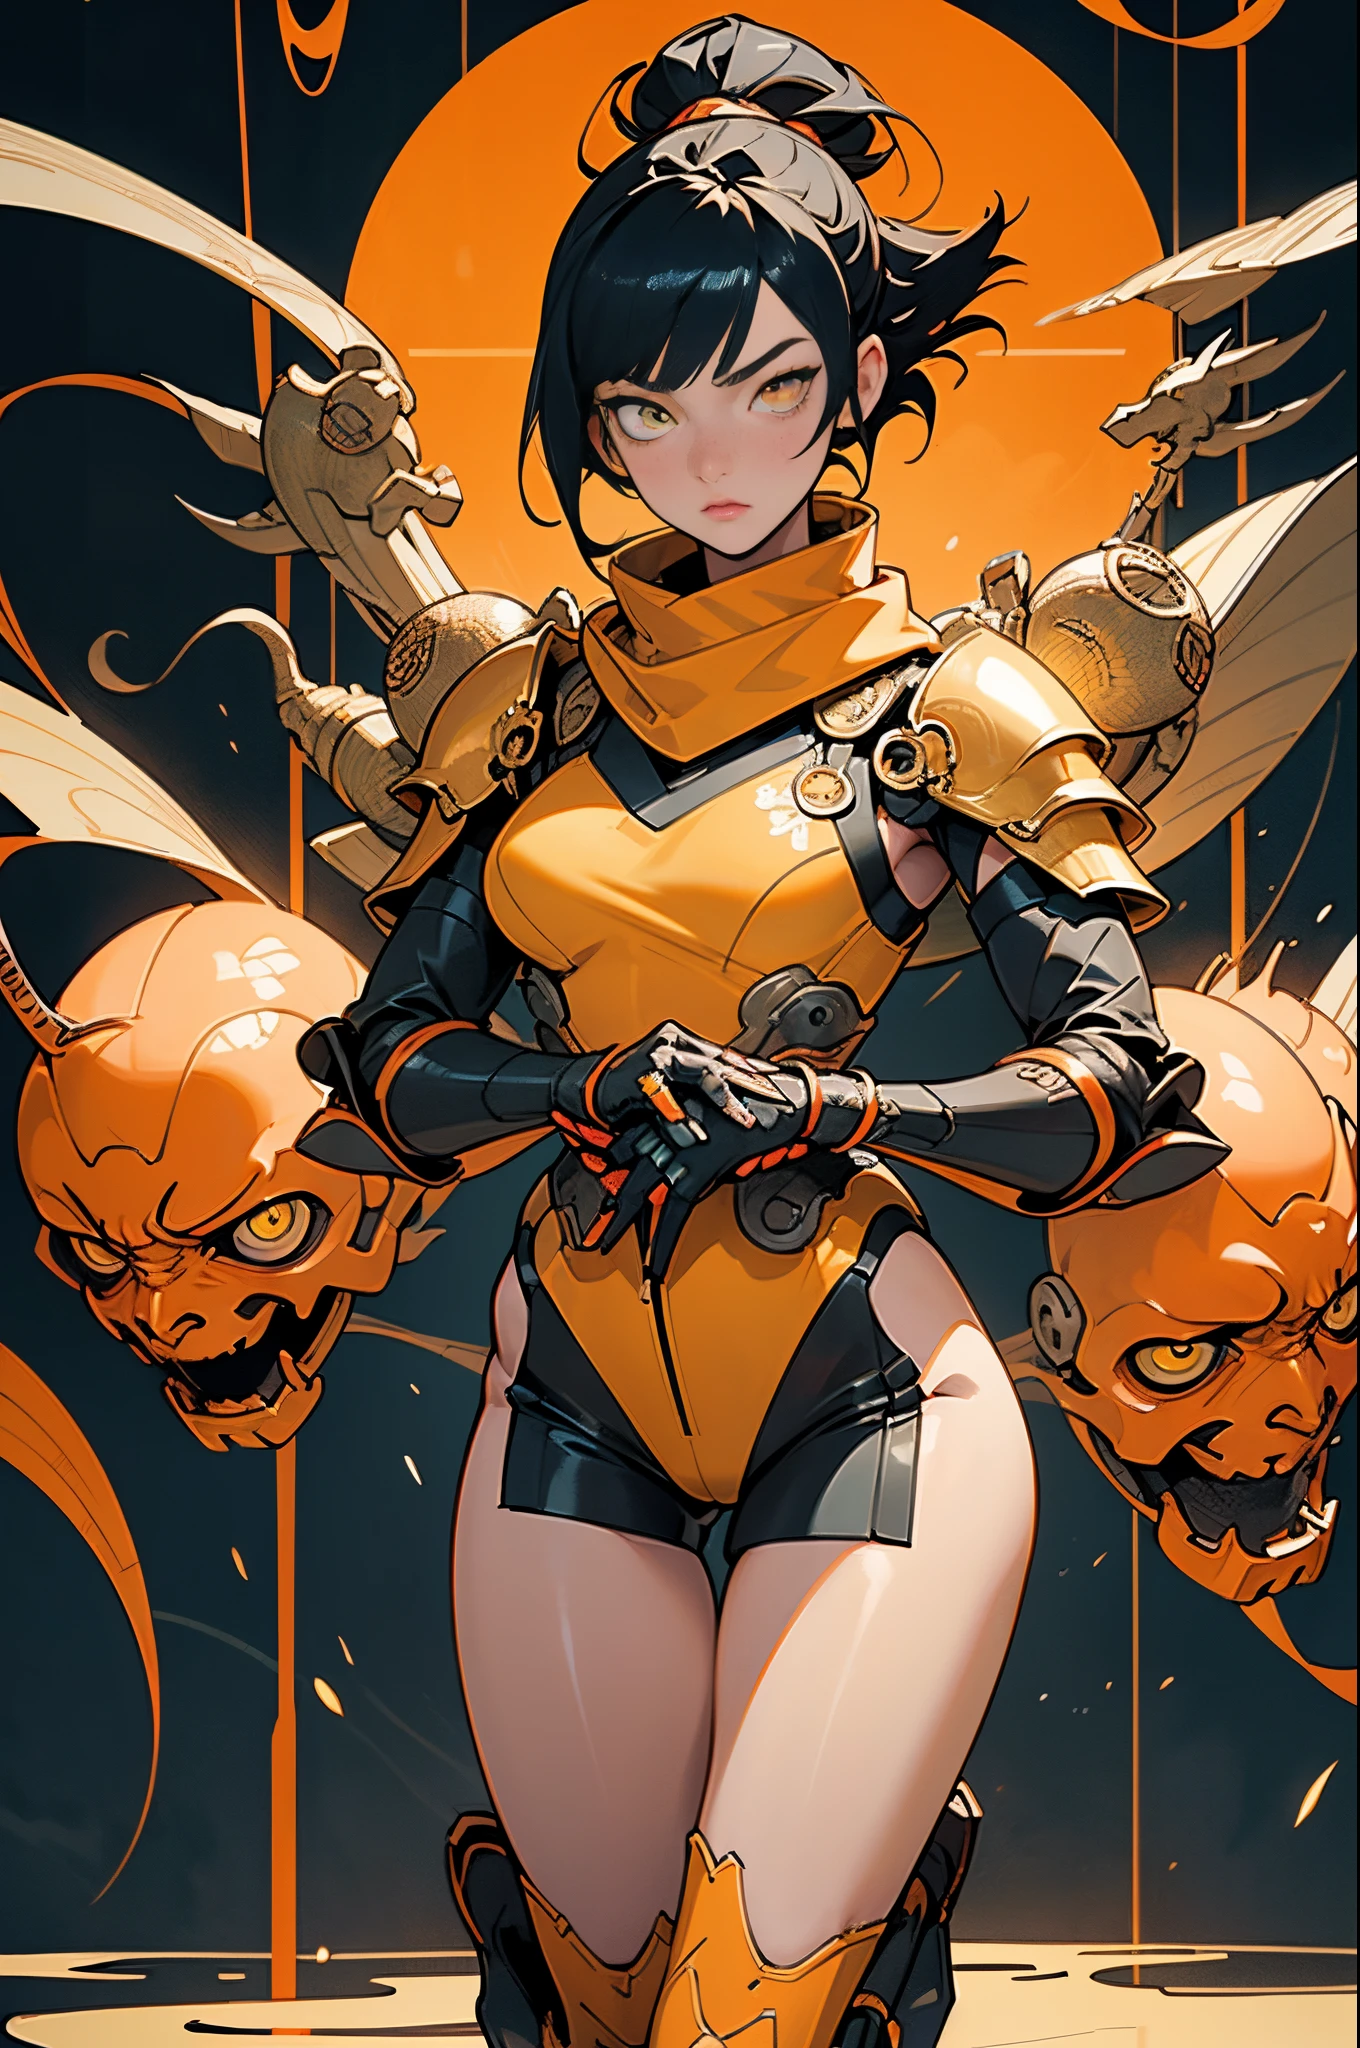 [Shinjuku background at night],Ginrei from Giant robot, (HENTAI ANIME) (Japanese NINJA Girl (Beauty) 19yo student)  and muscular [Slim & fit body], Short Bob Cut,([hornet] Orange Ninja Battle Armor) scarf [stall] ((Fitting rubber inner) [honeycomb] [edg]) hair adornments (Dull metallic luster:0.8),gravure [KUNOICHI],(Perfectly proportioned),Ideal color coordination),(Intricate and beautiful decoration (Dense detail)),[Perfect hand details],(Beautiful perfect face, yellow eyes, yellow irises, [Perfect eye details, [Full body like], fit thighs, thigh gap,[[Desaturation]], pretty hands, perfect fingers